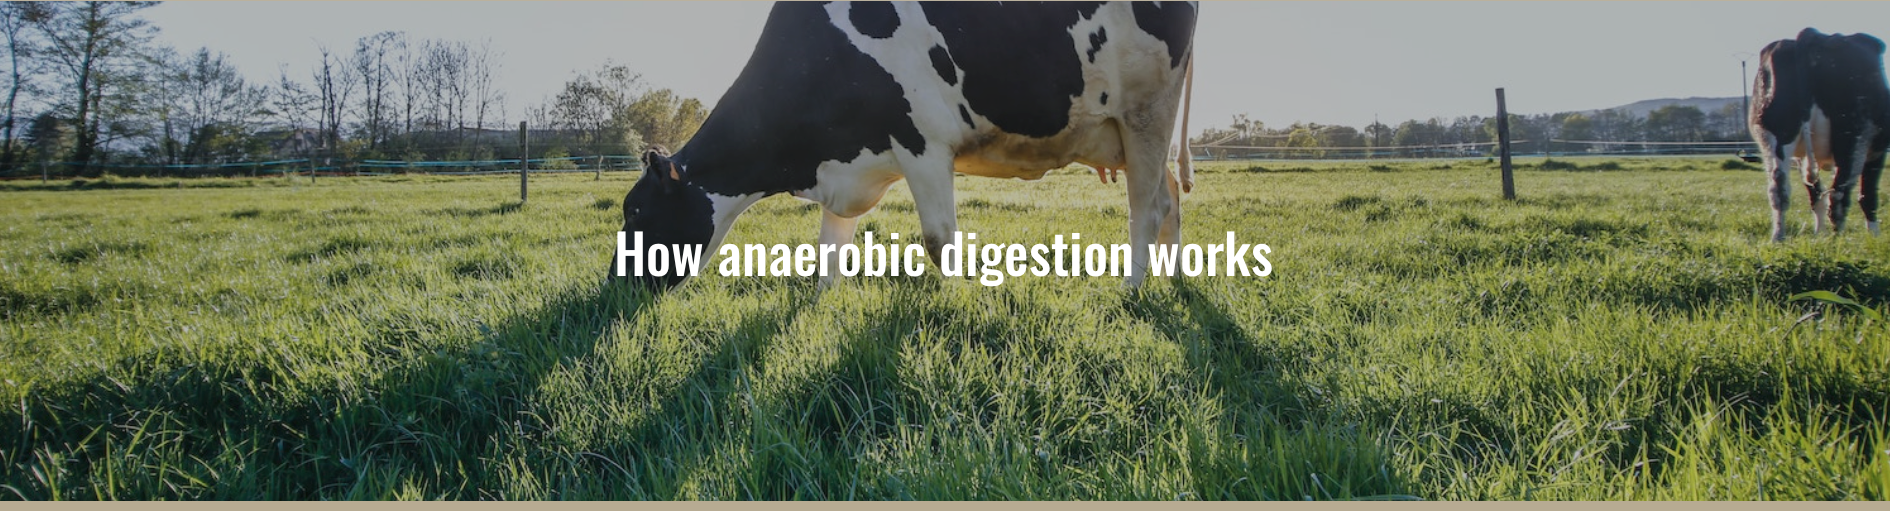 hero banner that says "How anaerobic digestion works"